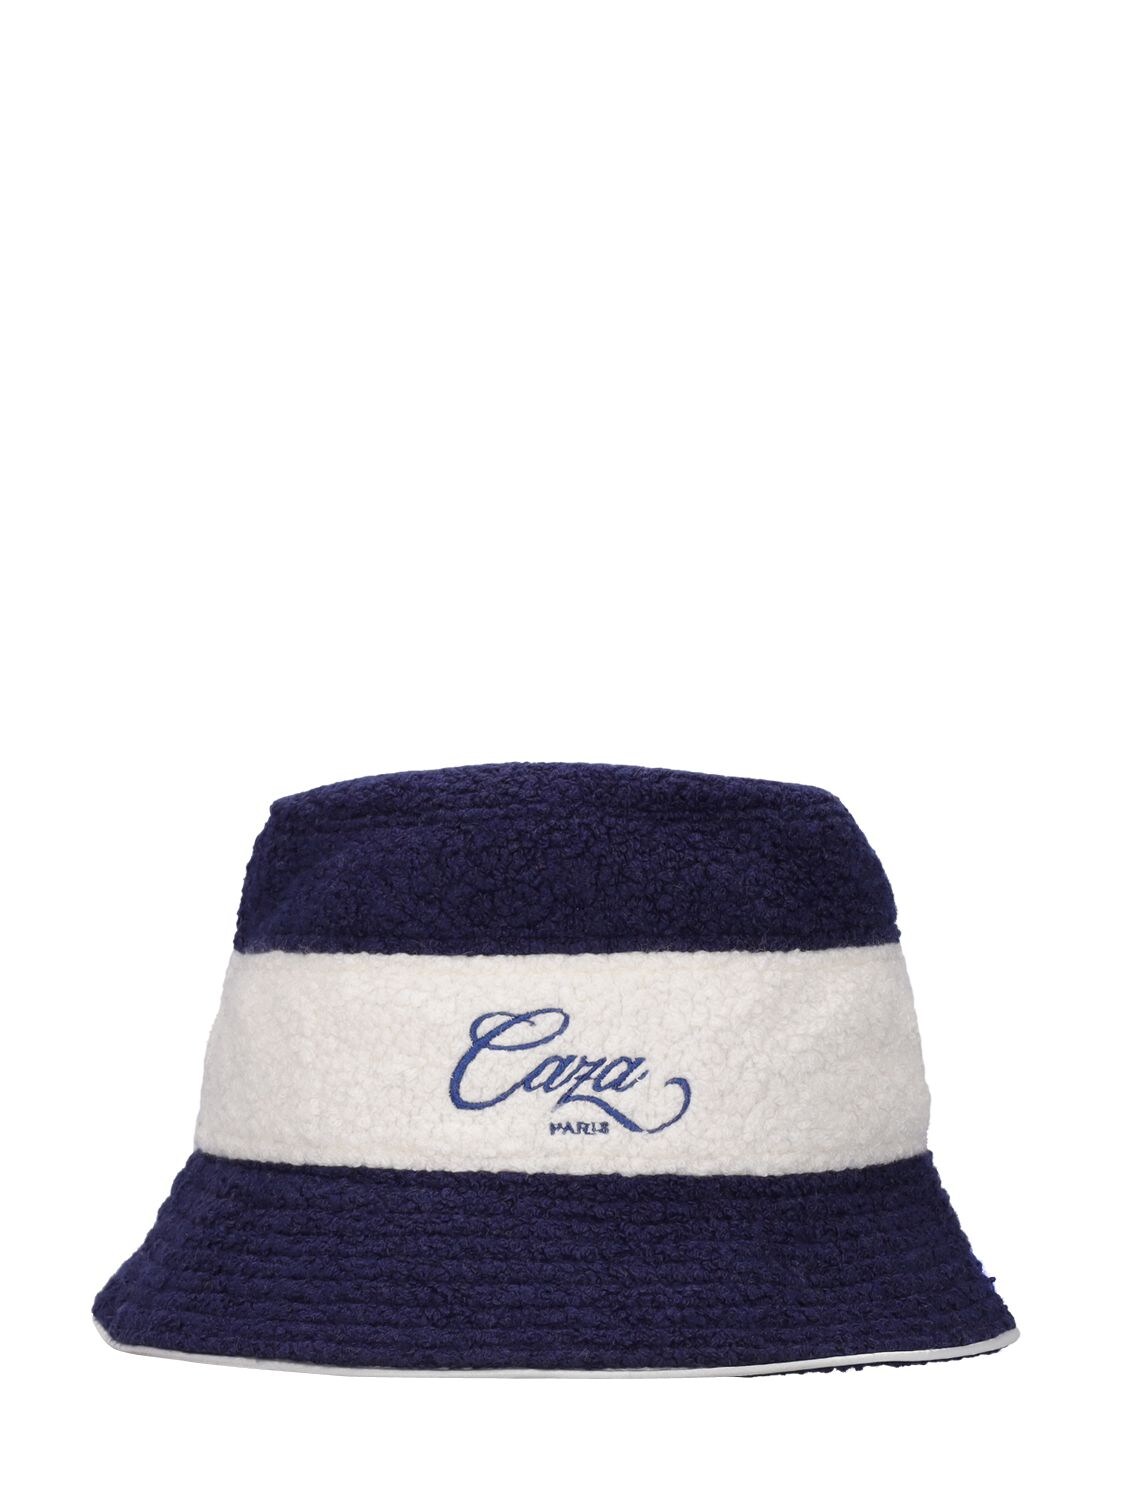 Caza Embroidered Wool Bucket Hat